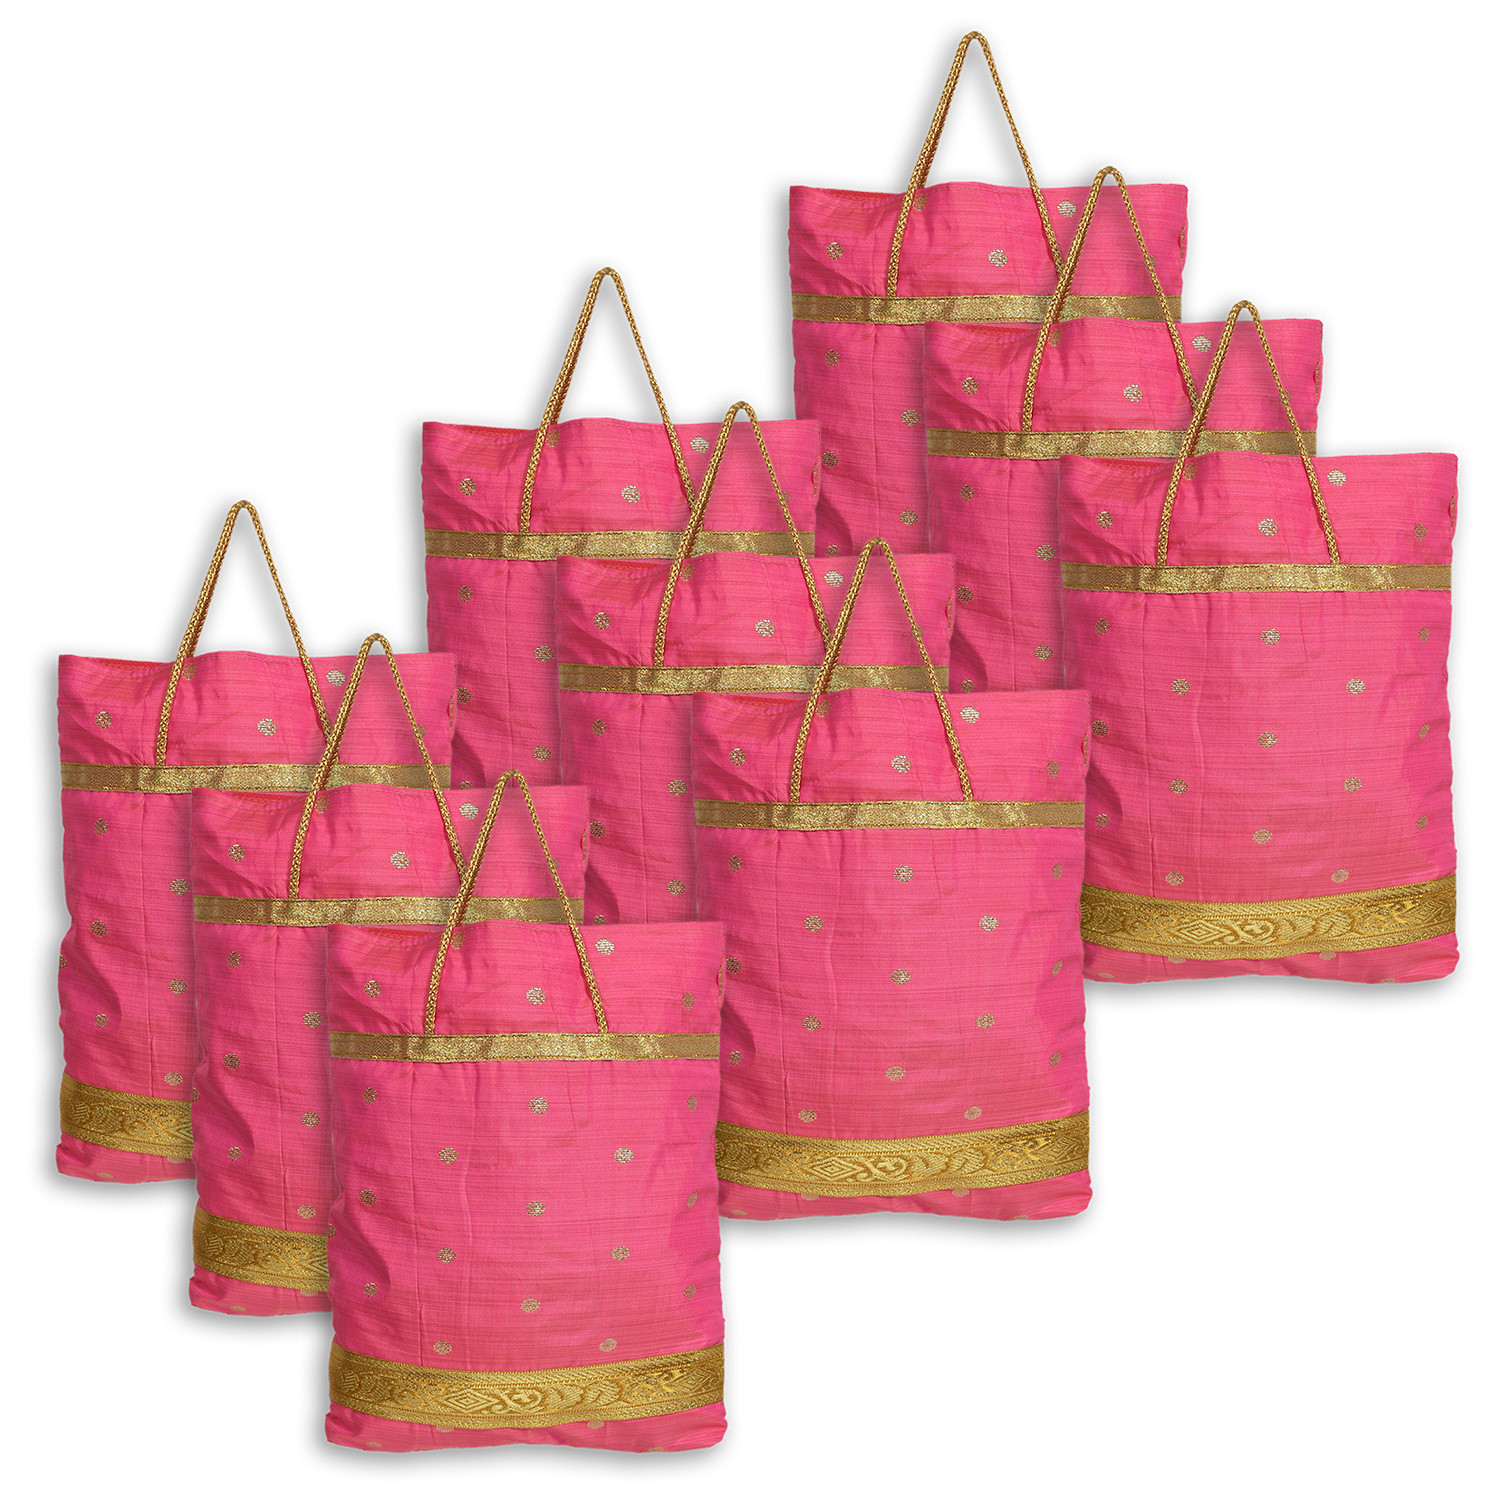 Kuber Industries Polyester Dot Print Hand Bag/Grocery Bag For Women/Girls With Handle (Pink) 54KM4055